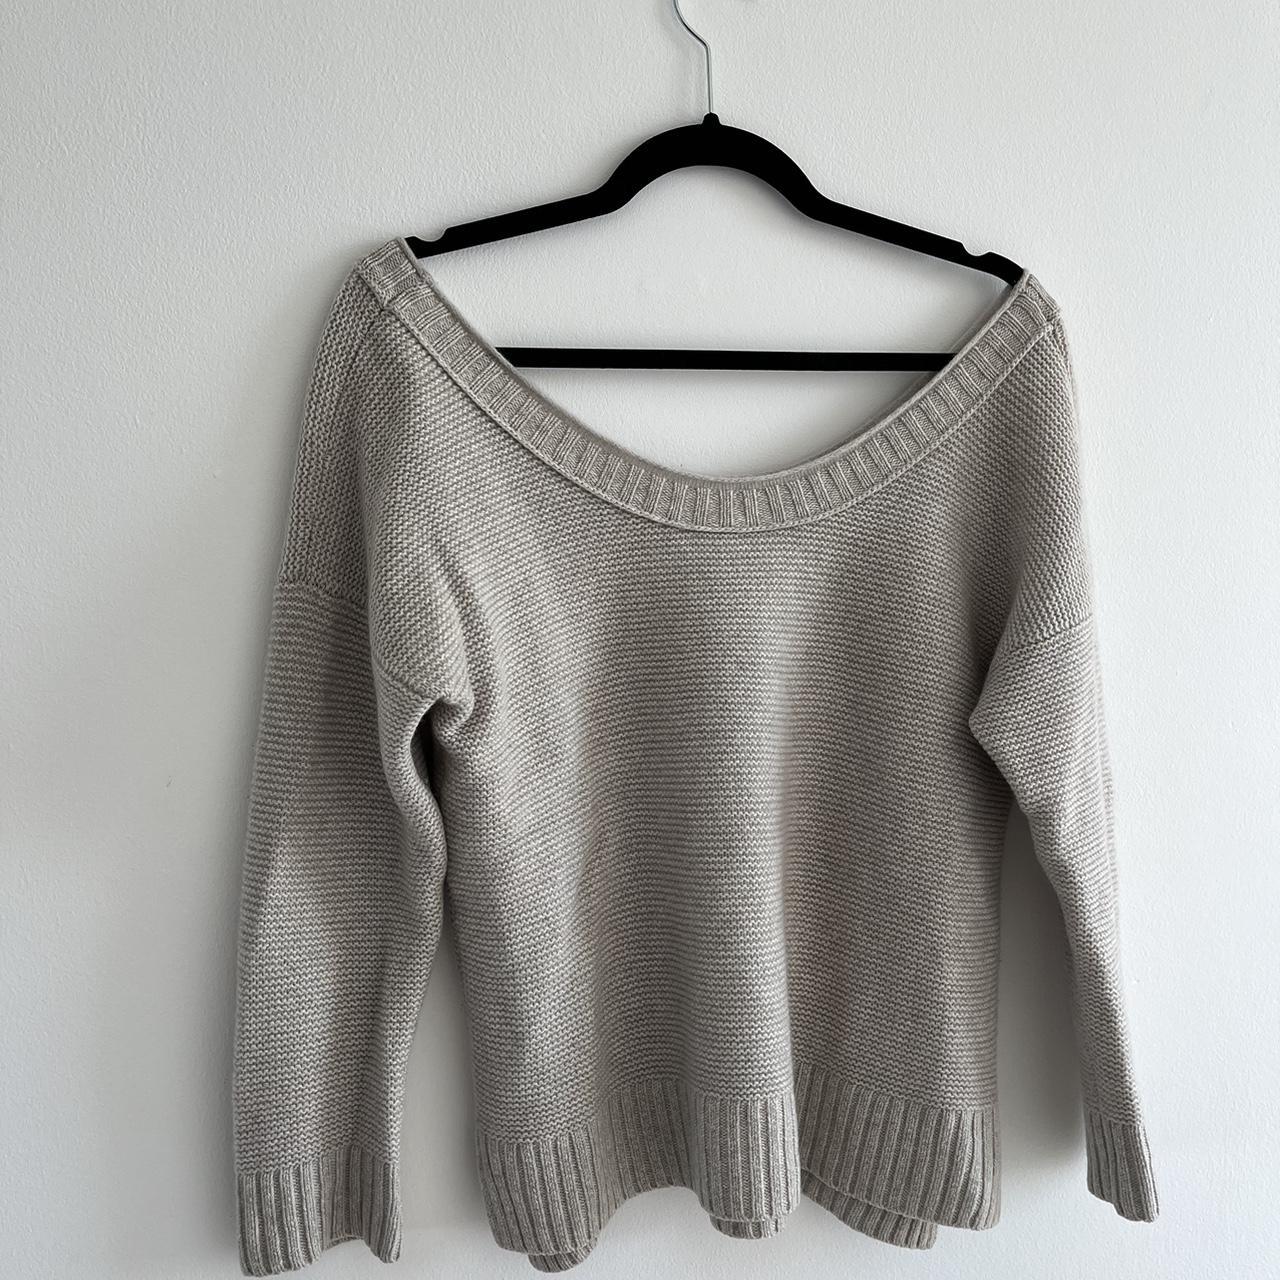 Club Monaco cashmere jumper. It can be styled off... - Depop